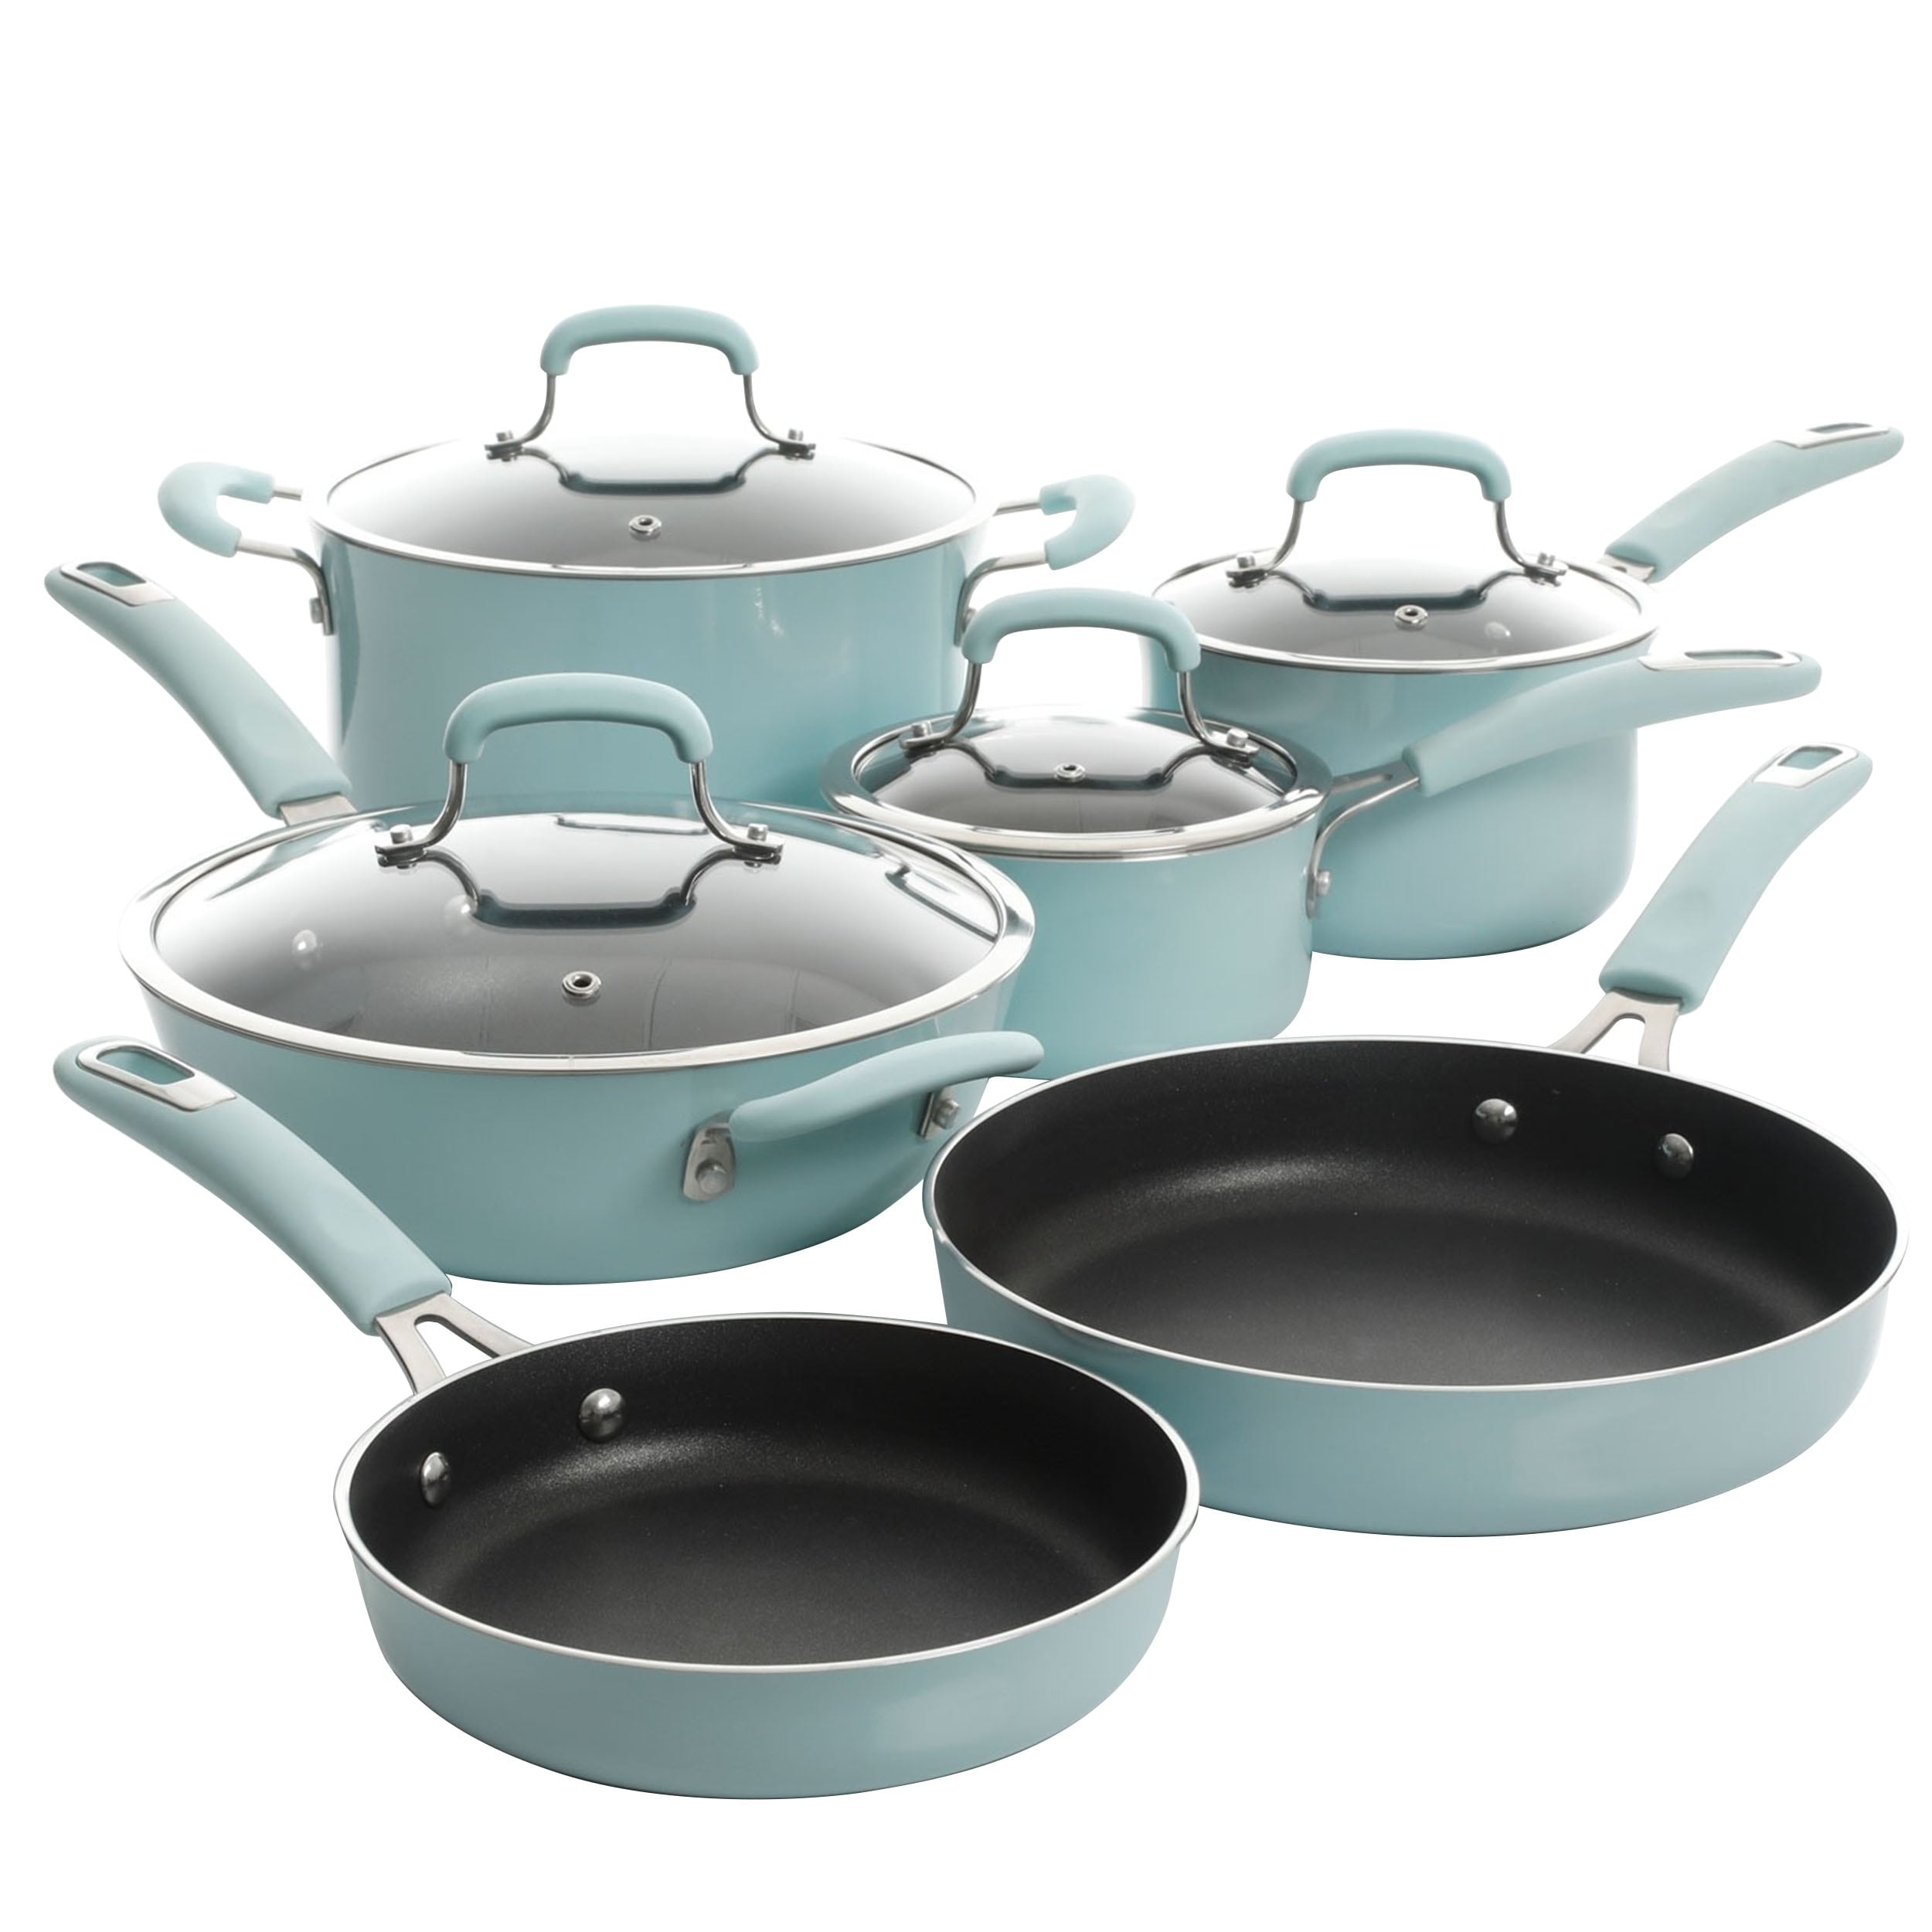 https://ak1.ostkcdn.com/images/products/is/images/direct/744b008a75eba2a7cae4f10be09ede4e5624c23d/Kenmore-Elite-Andover-10Pc-Nonstick-Al-Cookware-Set-in-Glacier-Blue.jpg